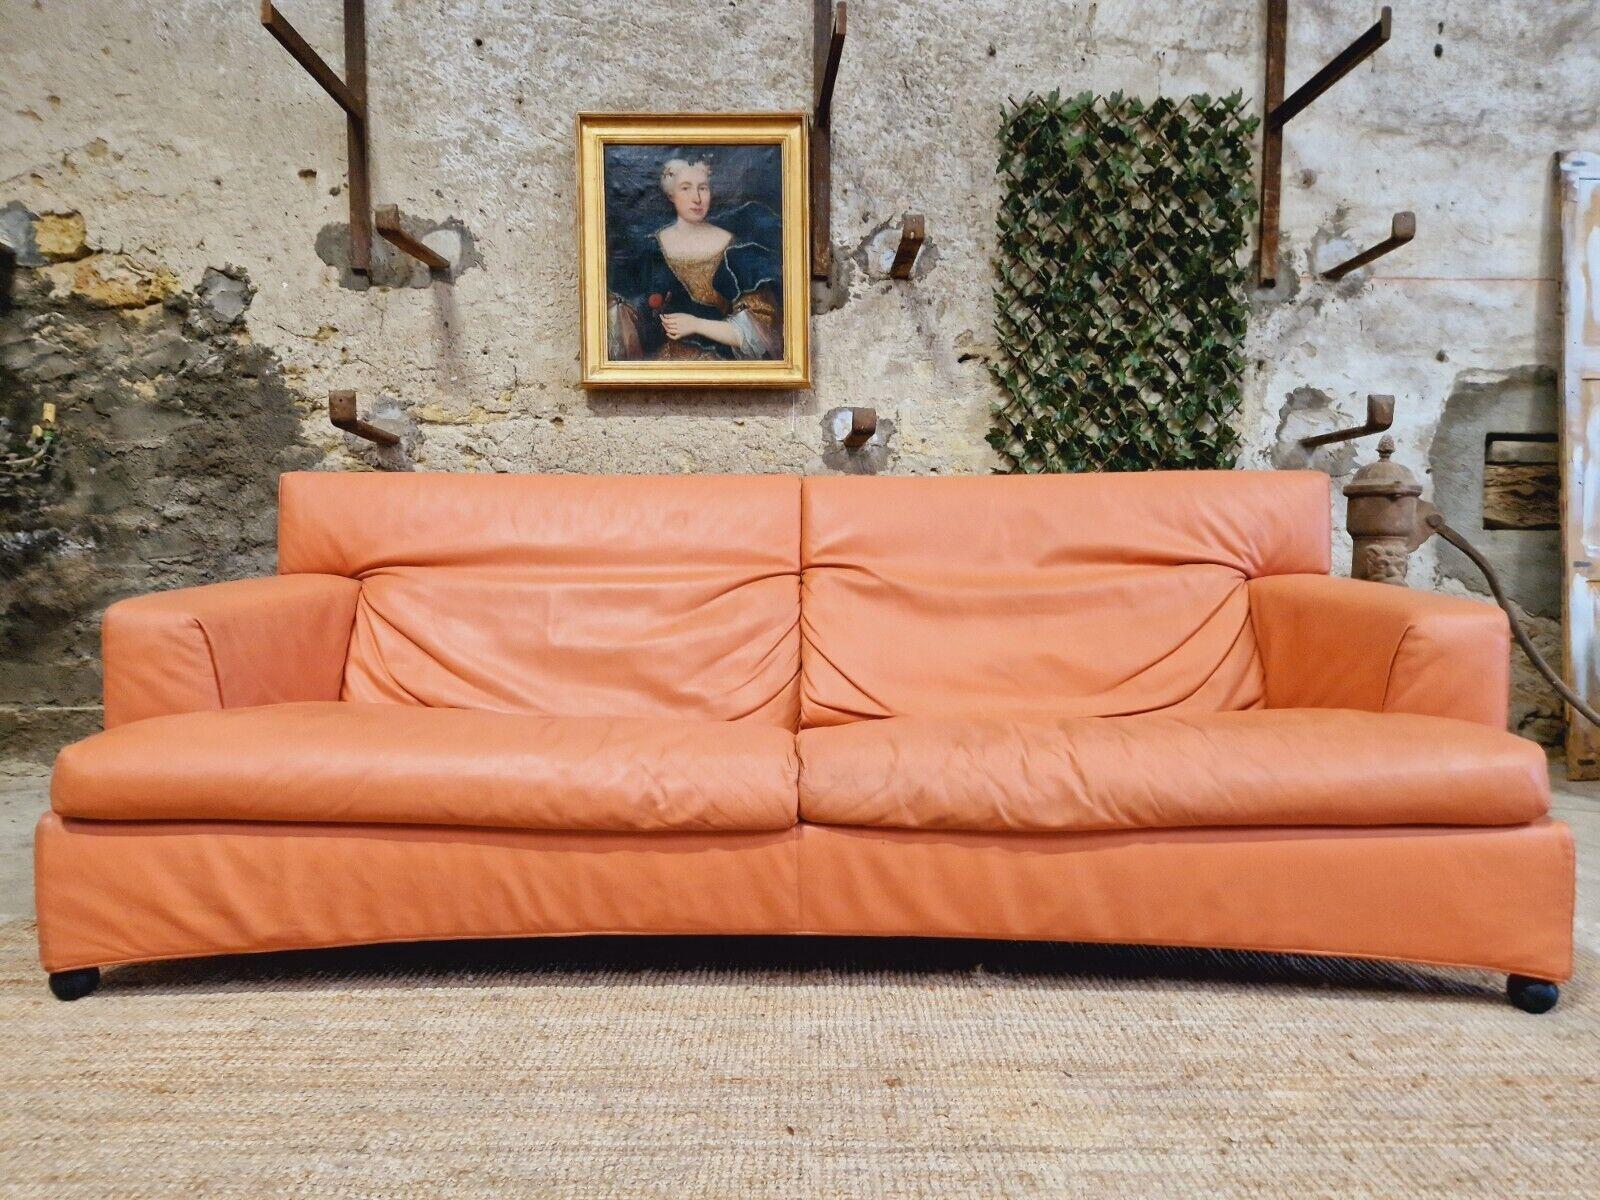 **SALE **

Experience the allure of vintage Italian design with this stunning Paolo Piva salmon pink leather sofa. Crafted in Italy with a solid pattern and sleek modern back style, this vintage piece is a must-have for anyone looking to add a touch